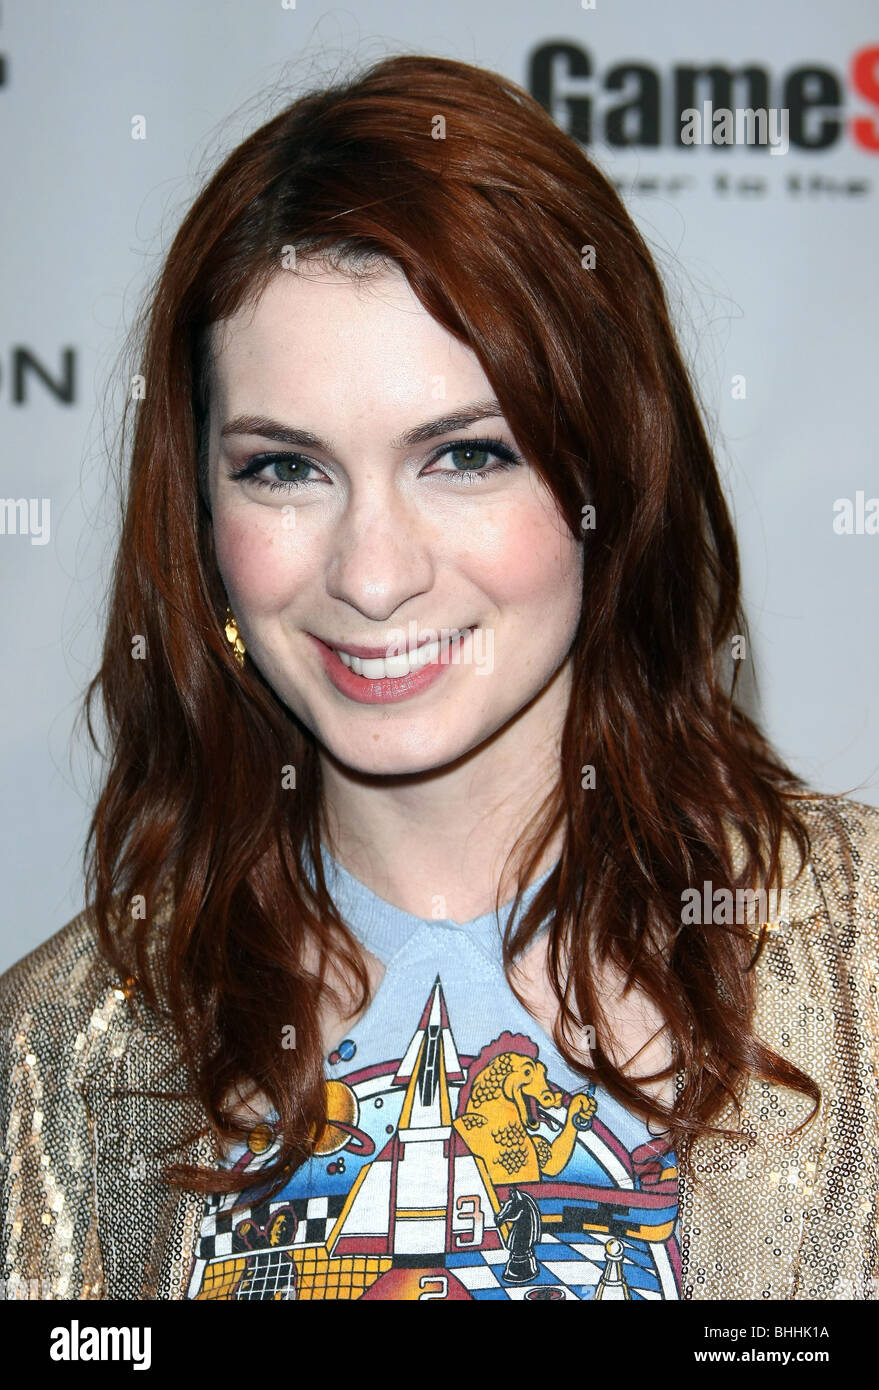 FELICIA DAY SPIKE TV VIDEO GAME AWARDS 2009 DOWNTOWN LOS ANGELES CA USA 12 December 2009 Stock Photo